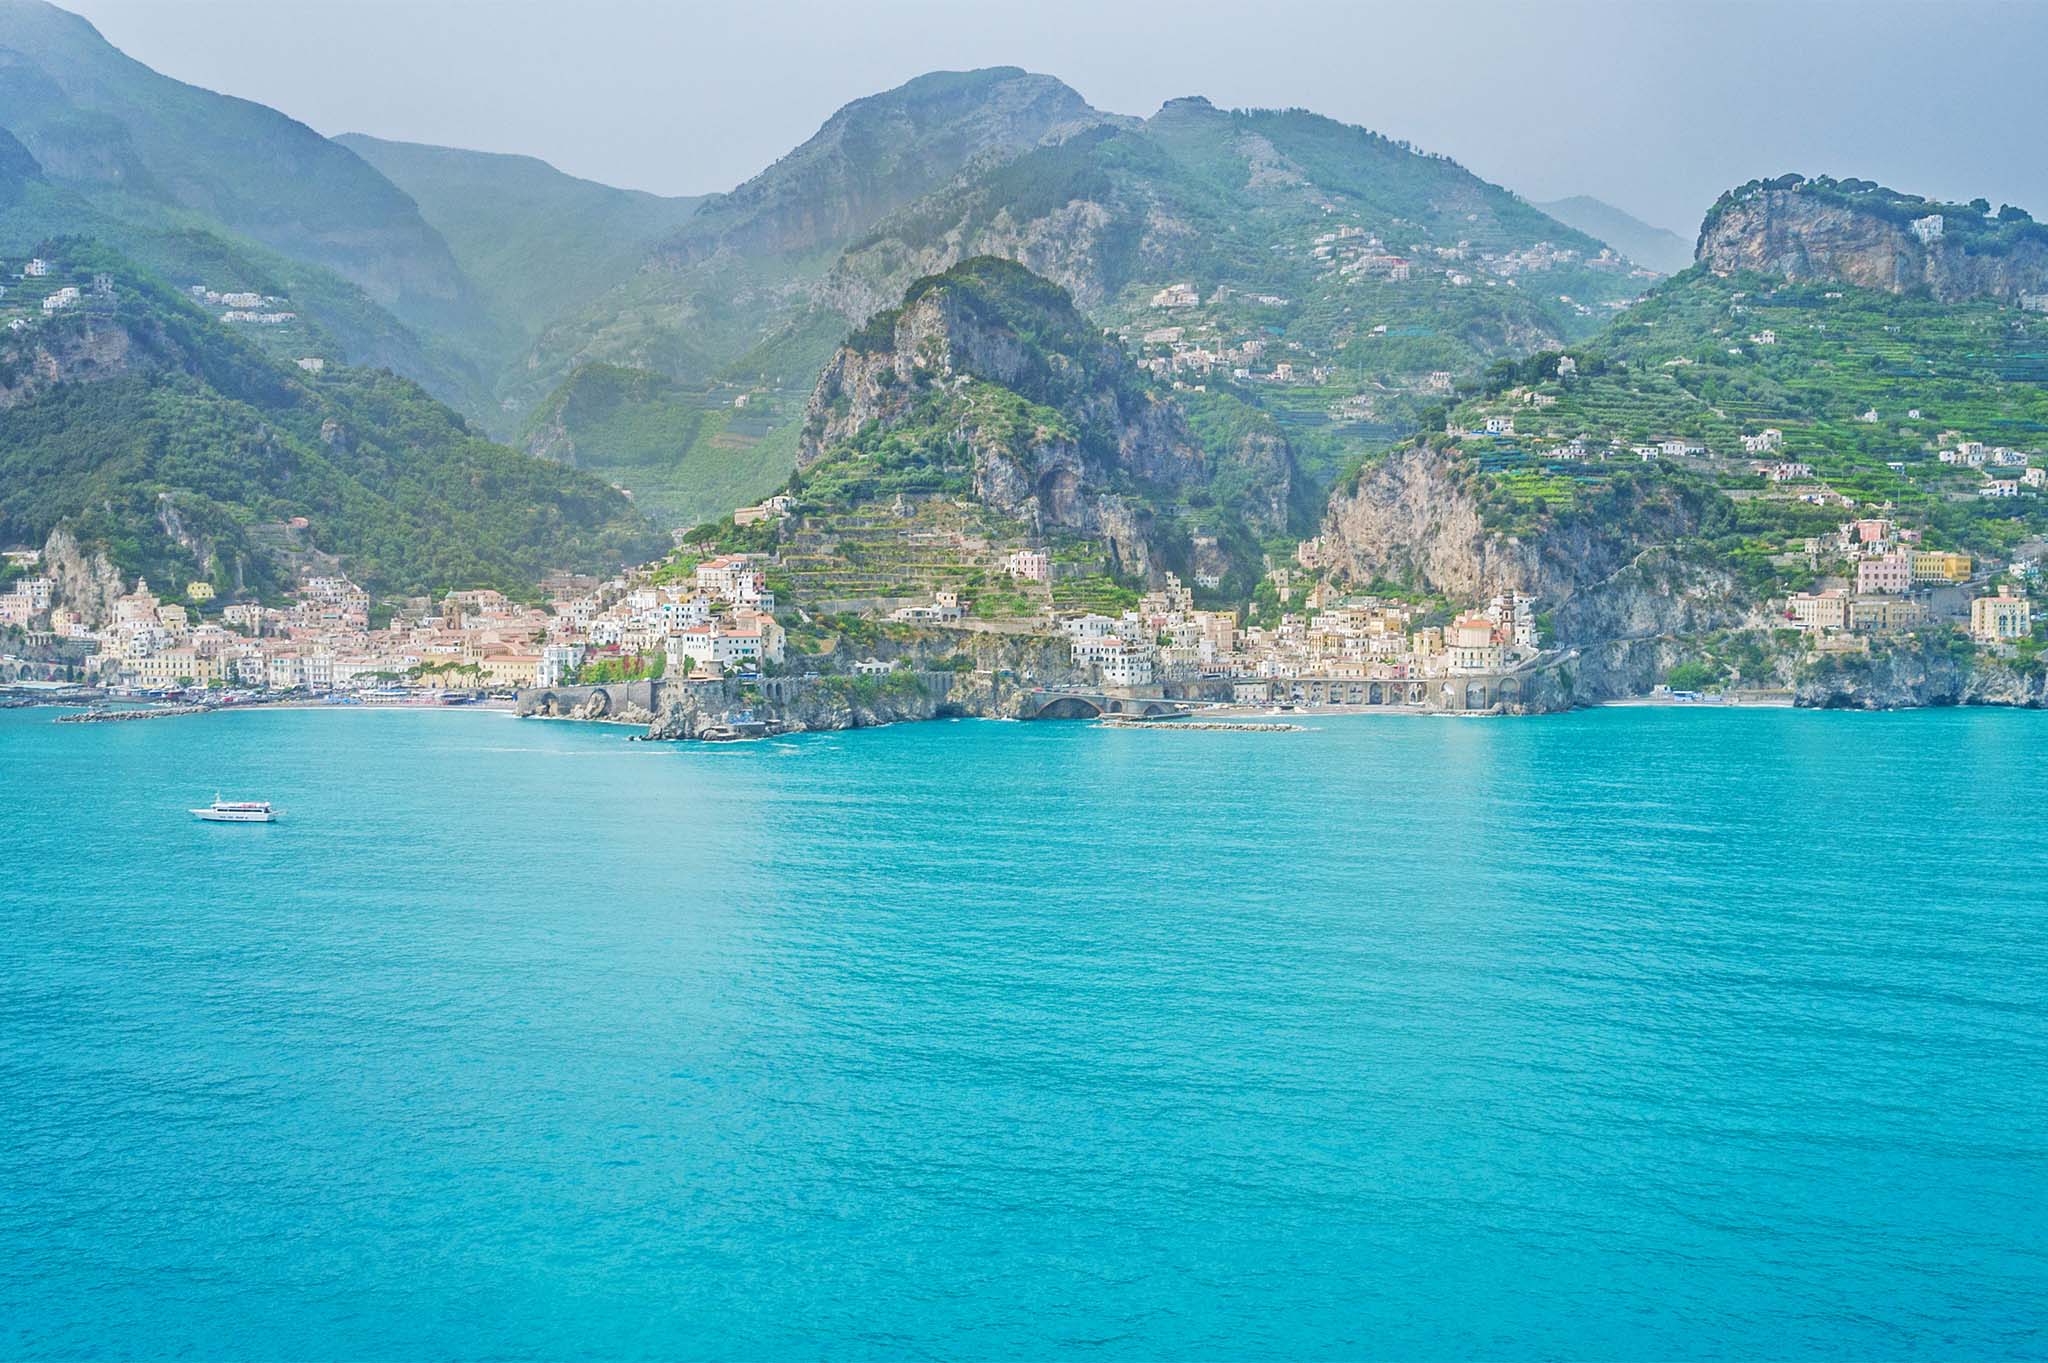 Amalfi Coast Villas and Homes for sale, Italy Sotheby’s Realty - sothebys.photo 1